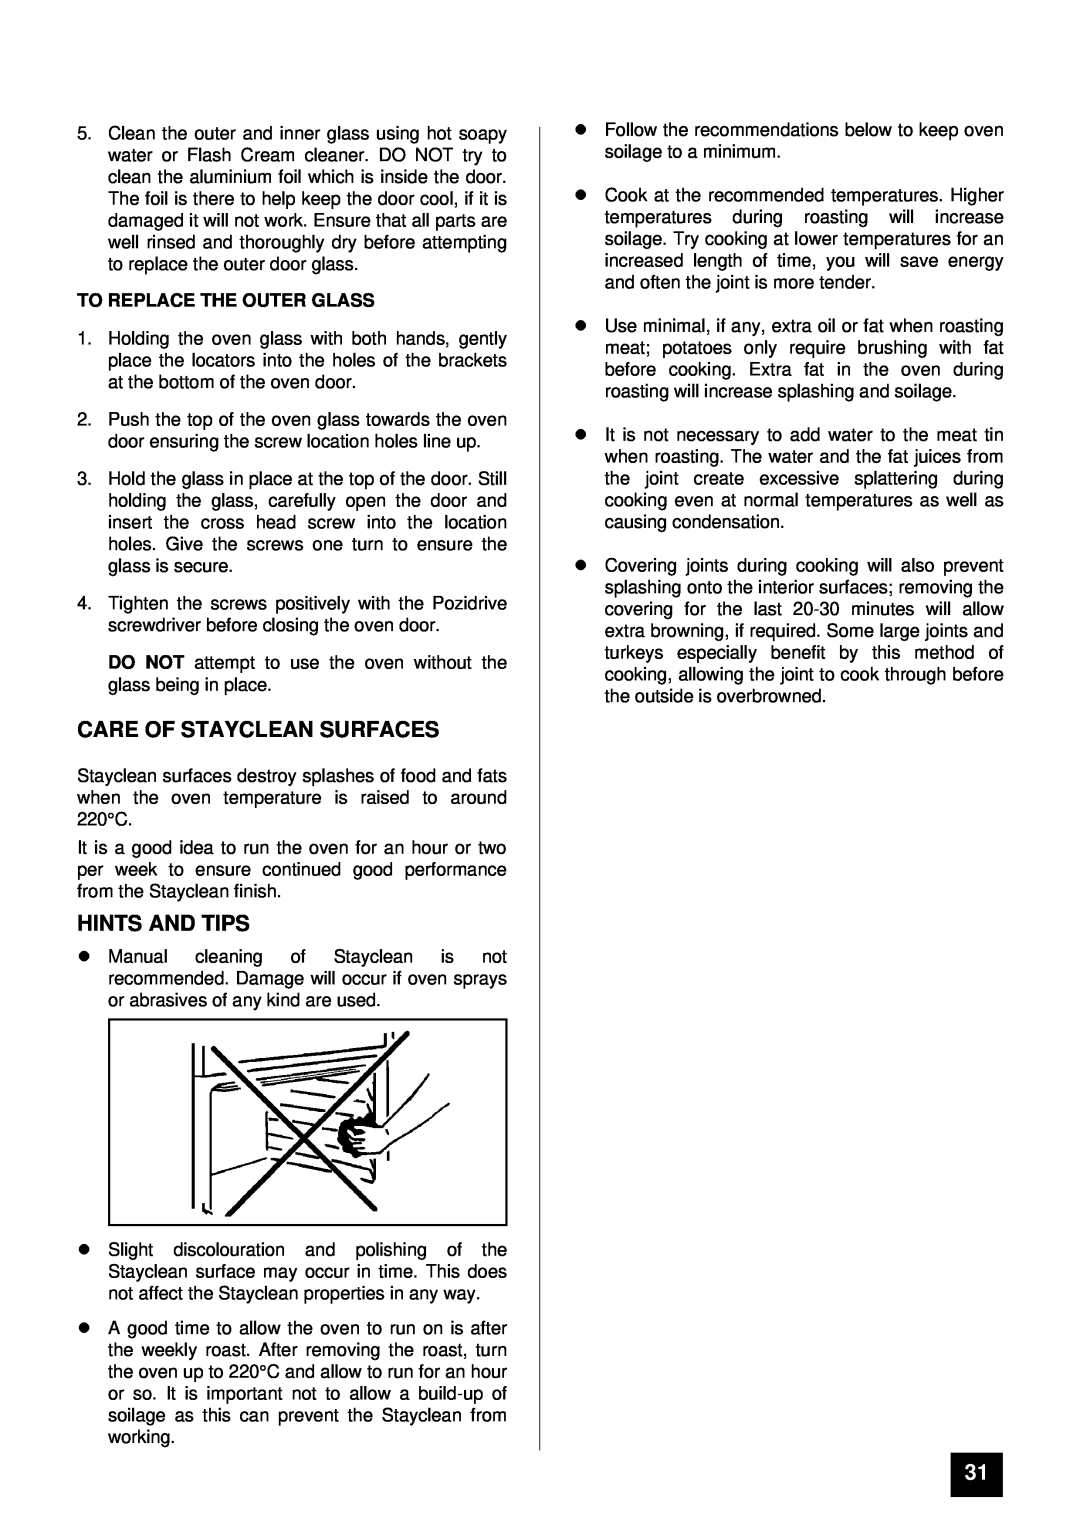 Tricity Bendix BD 911 installation instructions Care Of Stayclean Surfaces, lHINTS AND TIPS, To Replace The Outer Glass 